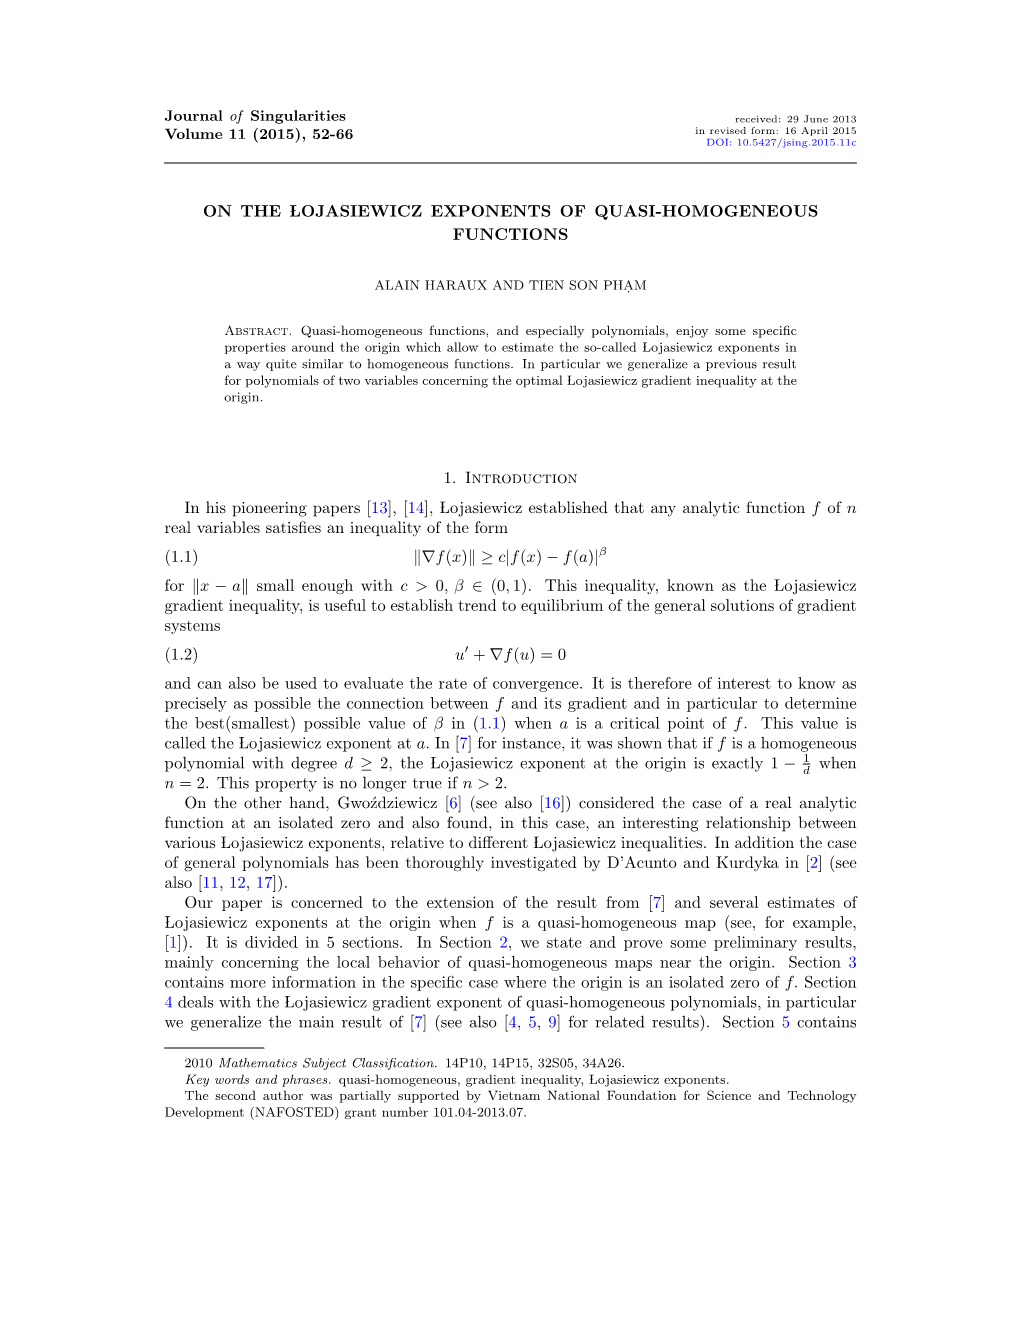 On the Łojasiewicz Exponents of Quasi-Homogeneous Functions